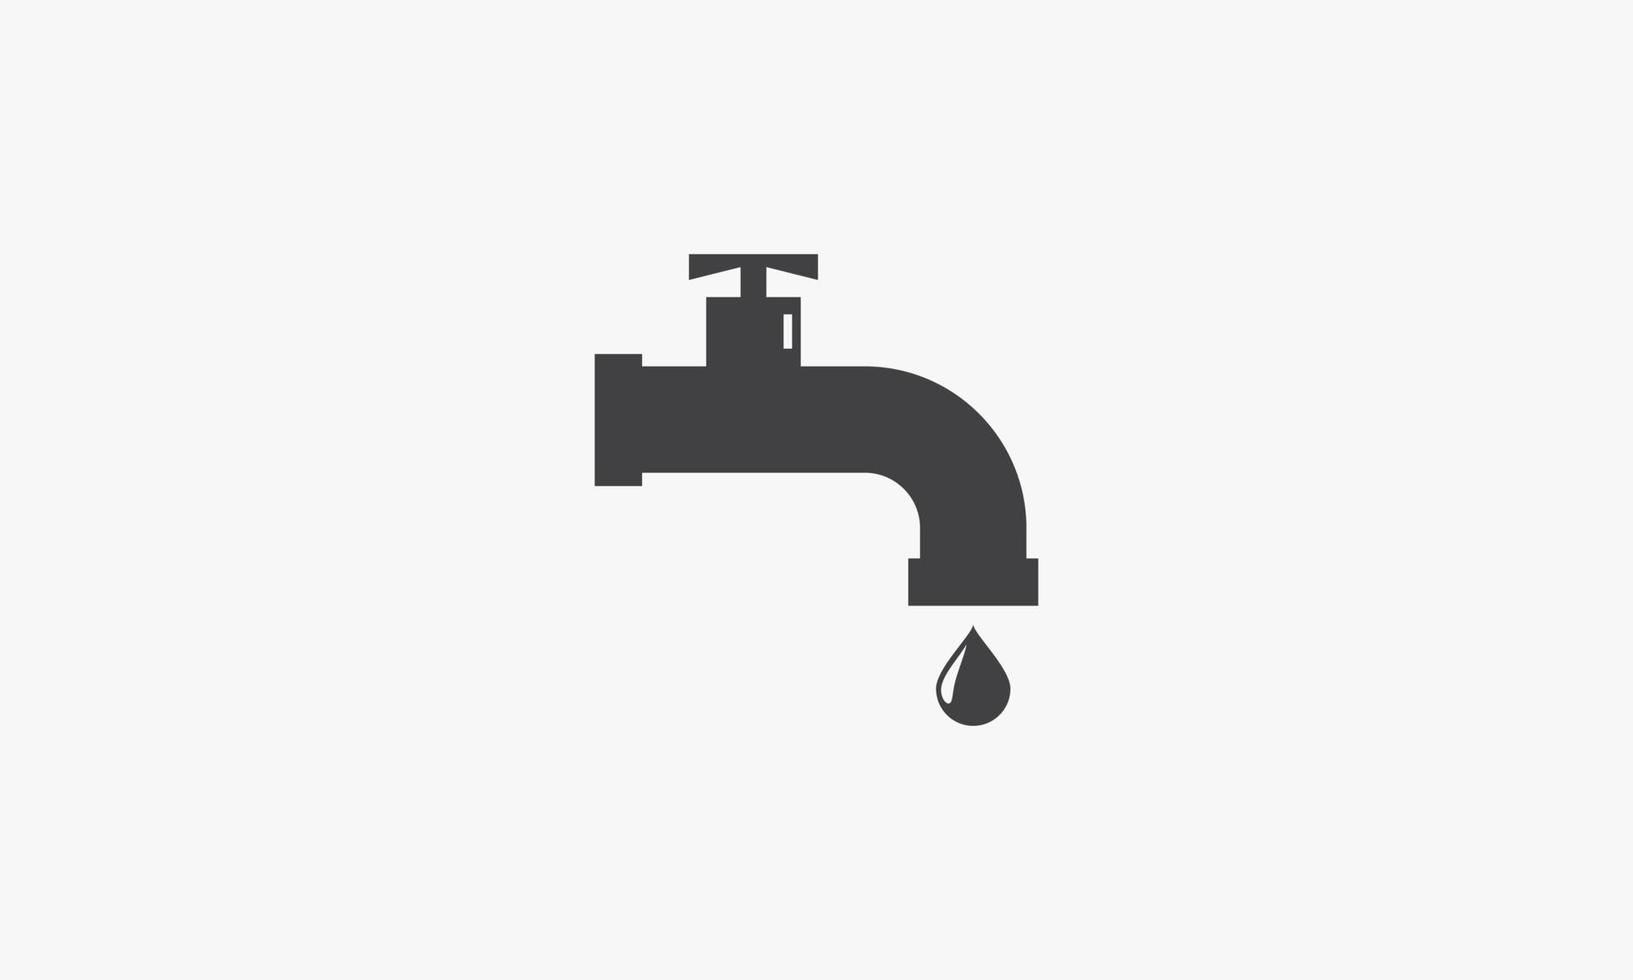 faucet icon design vector illustration. isolated on white background.